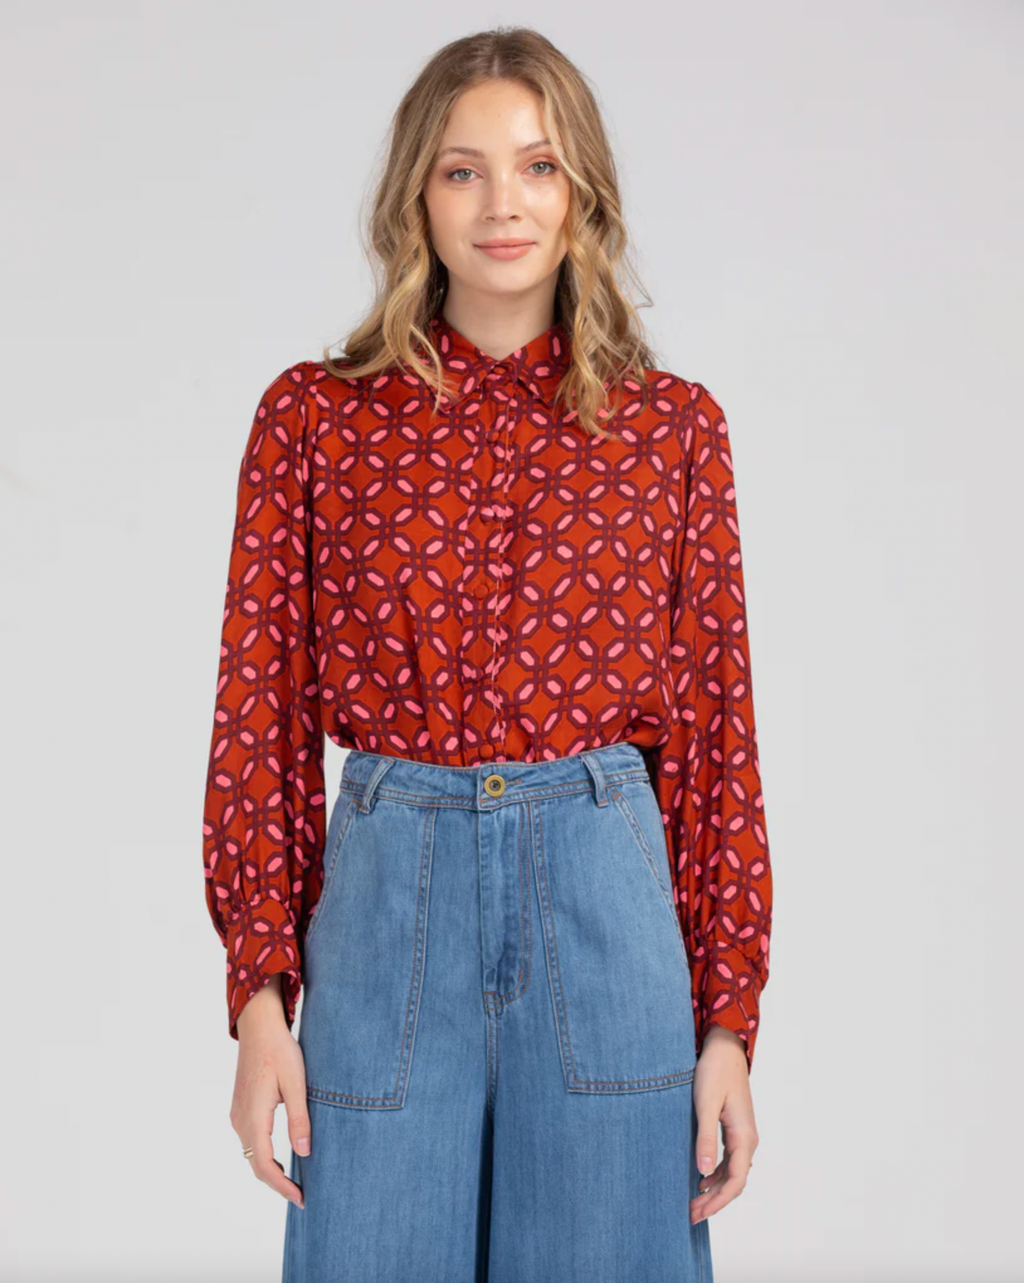 the ally shirt by boom shankar is a bright red and pink geometric retro printed boho button up long sleeve top made ethically in india